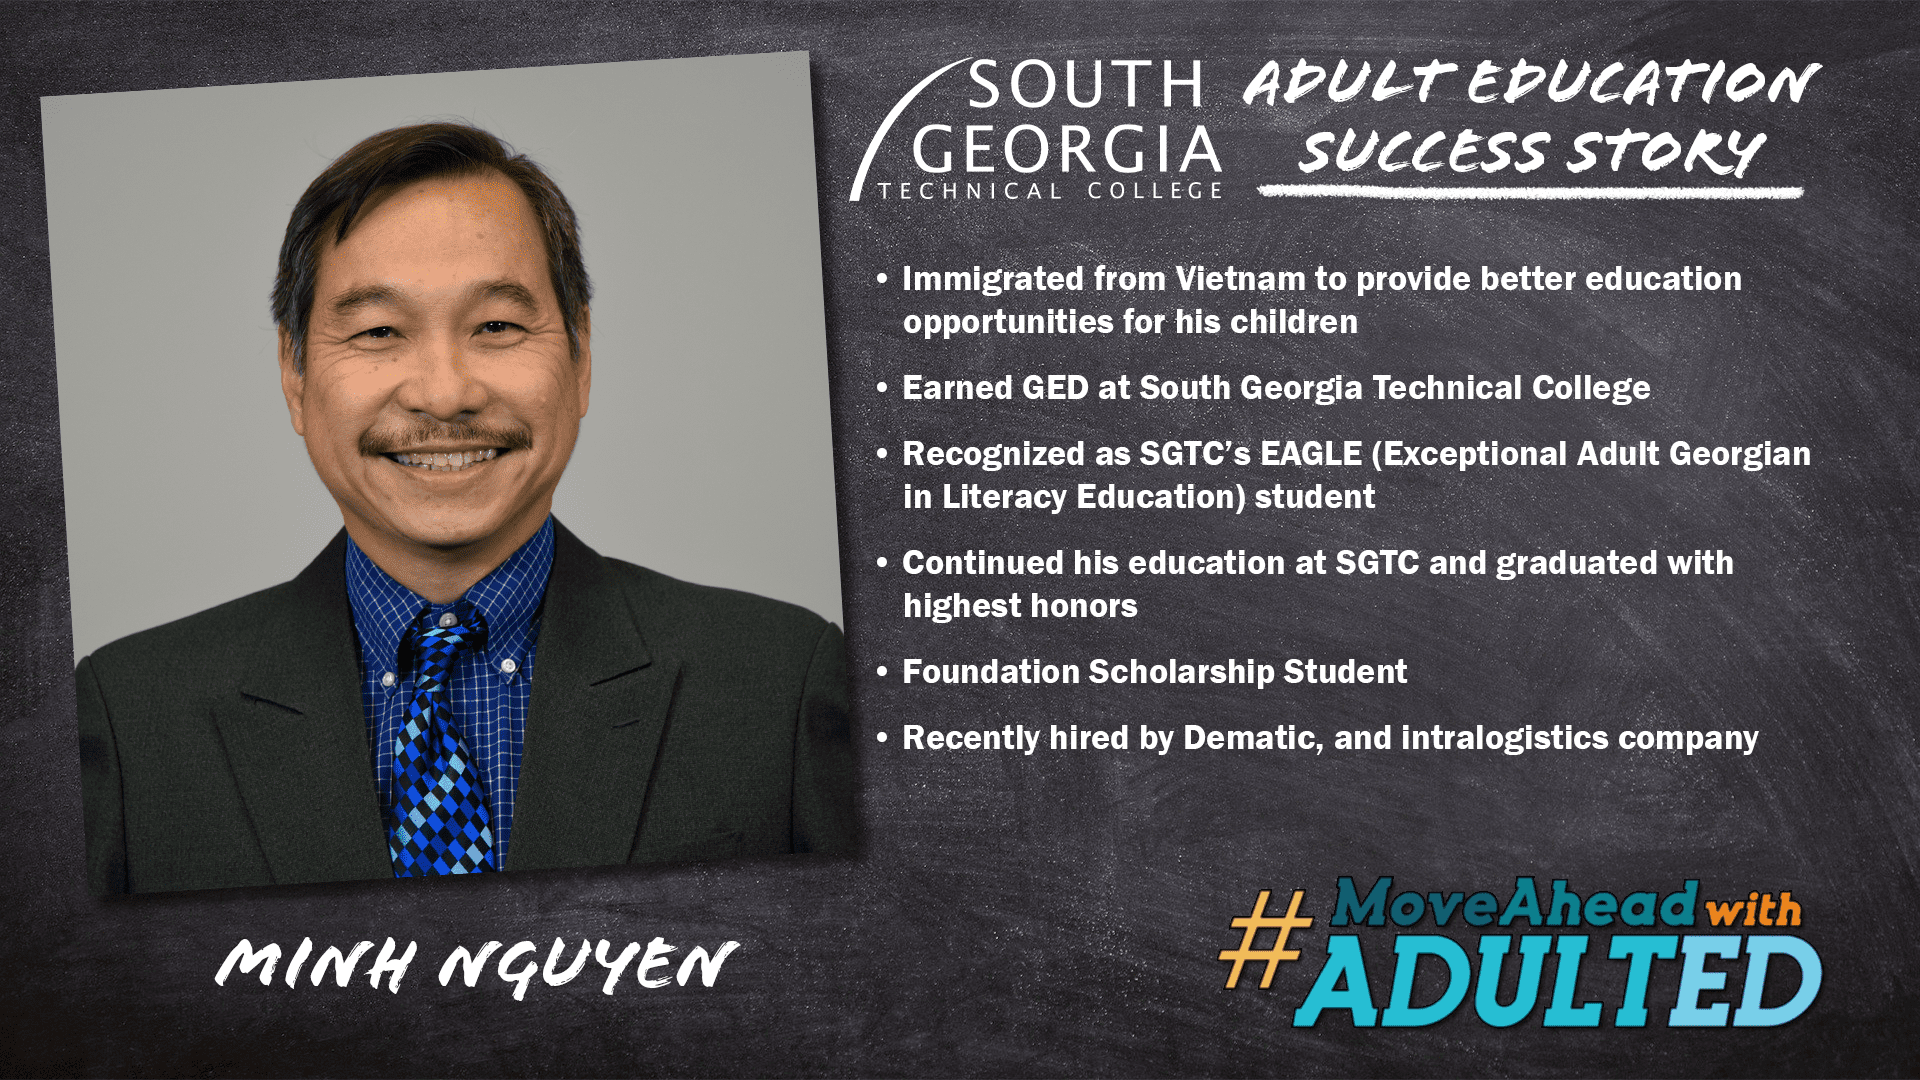 Minh Nguyen earned his High School Equivalency and has gone on to earn multiple diplomas at SGTC. He recently started a new career with Dematic.